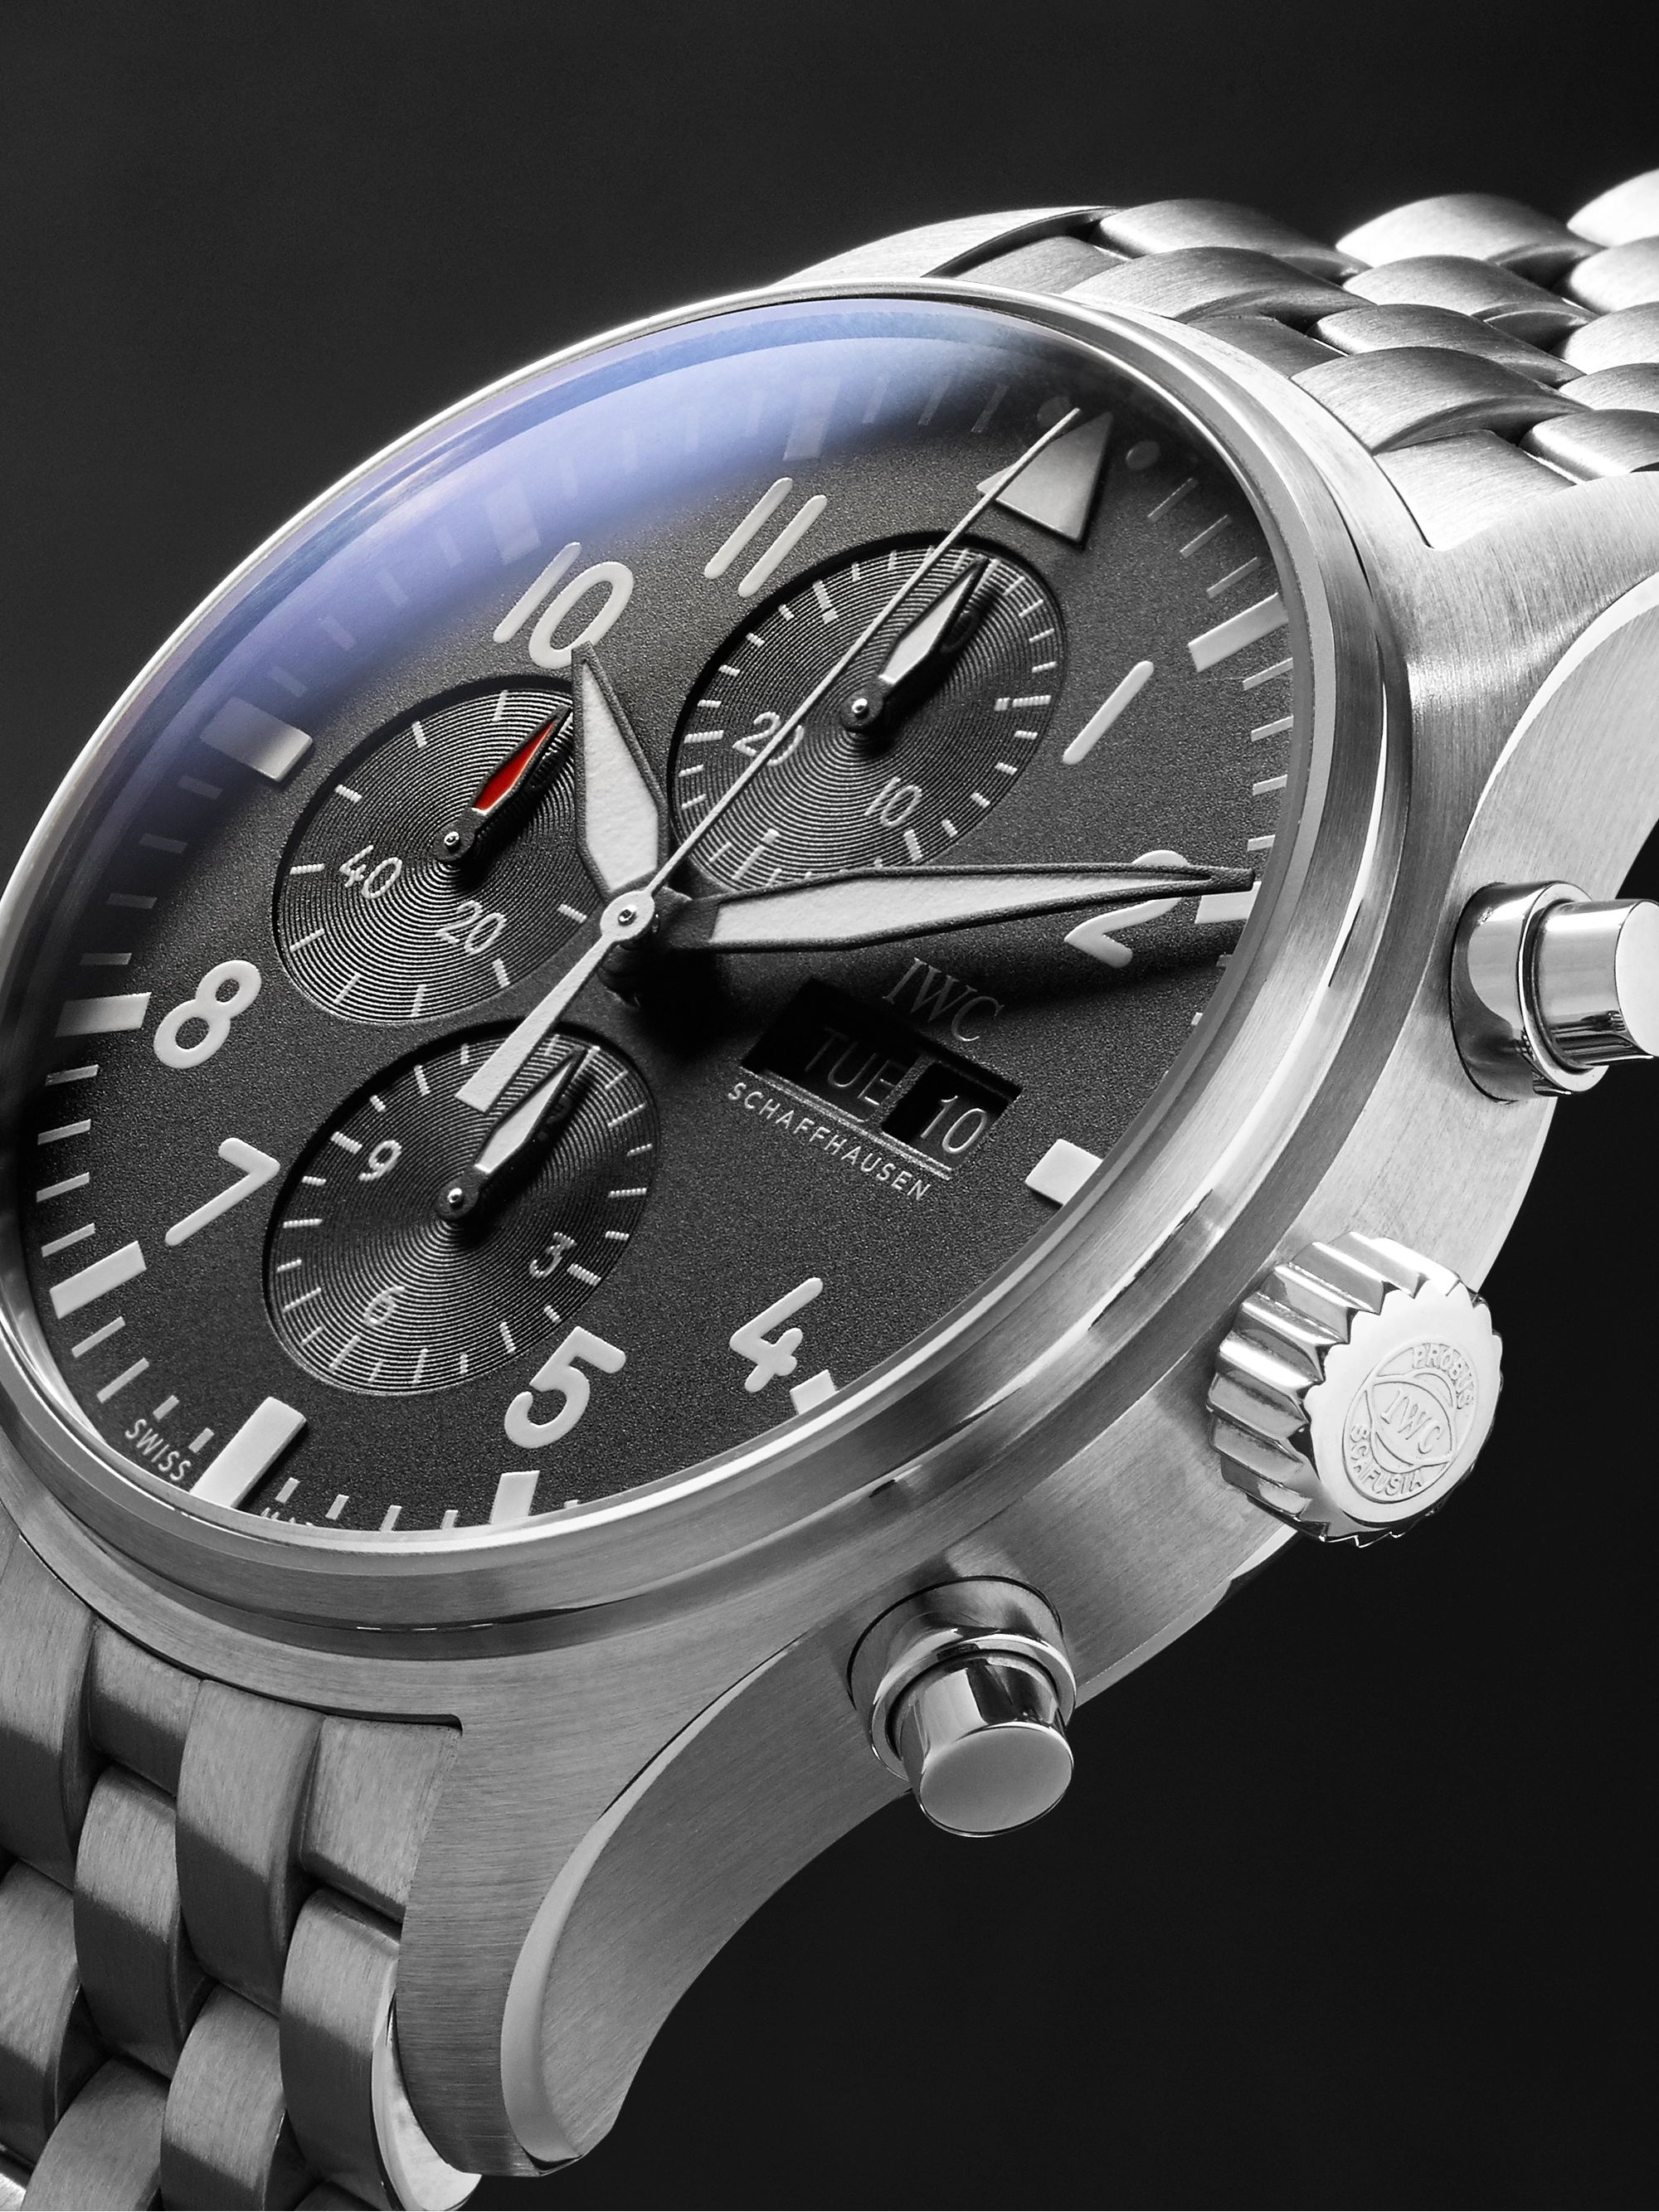 IWC SCHAFFHAUSEN Pilot's Automatic Chronograph 43mm Stainless Steel Watch, Ref. No. IW377710